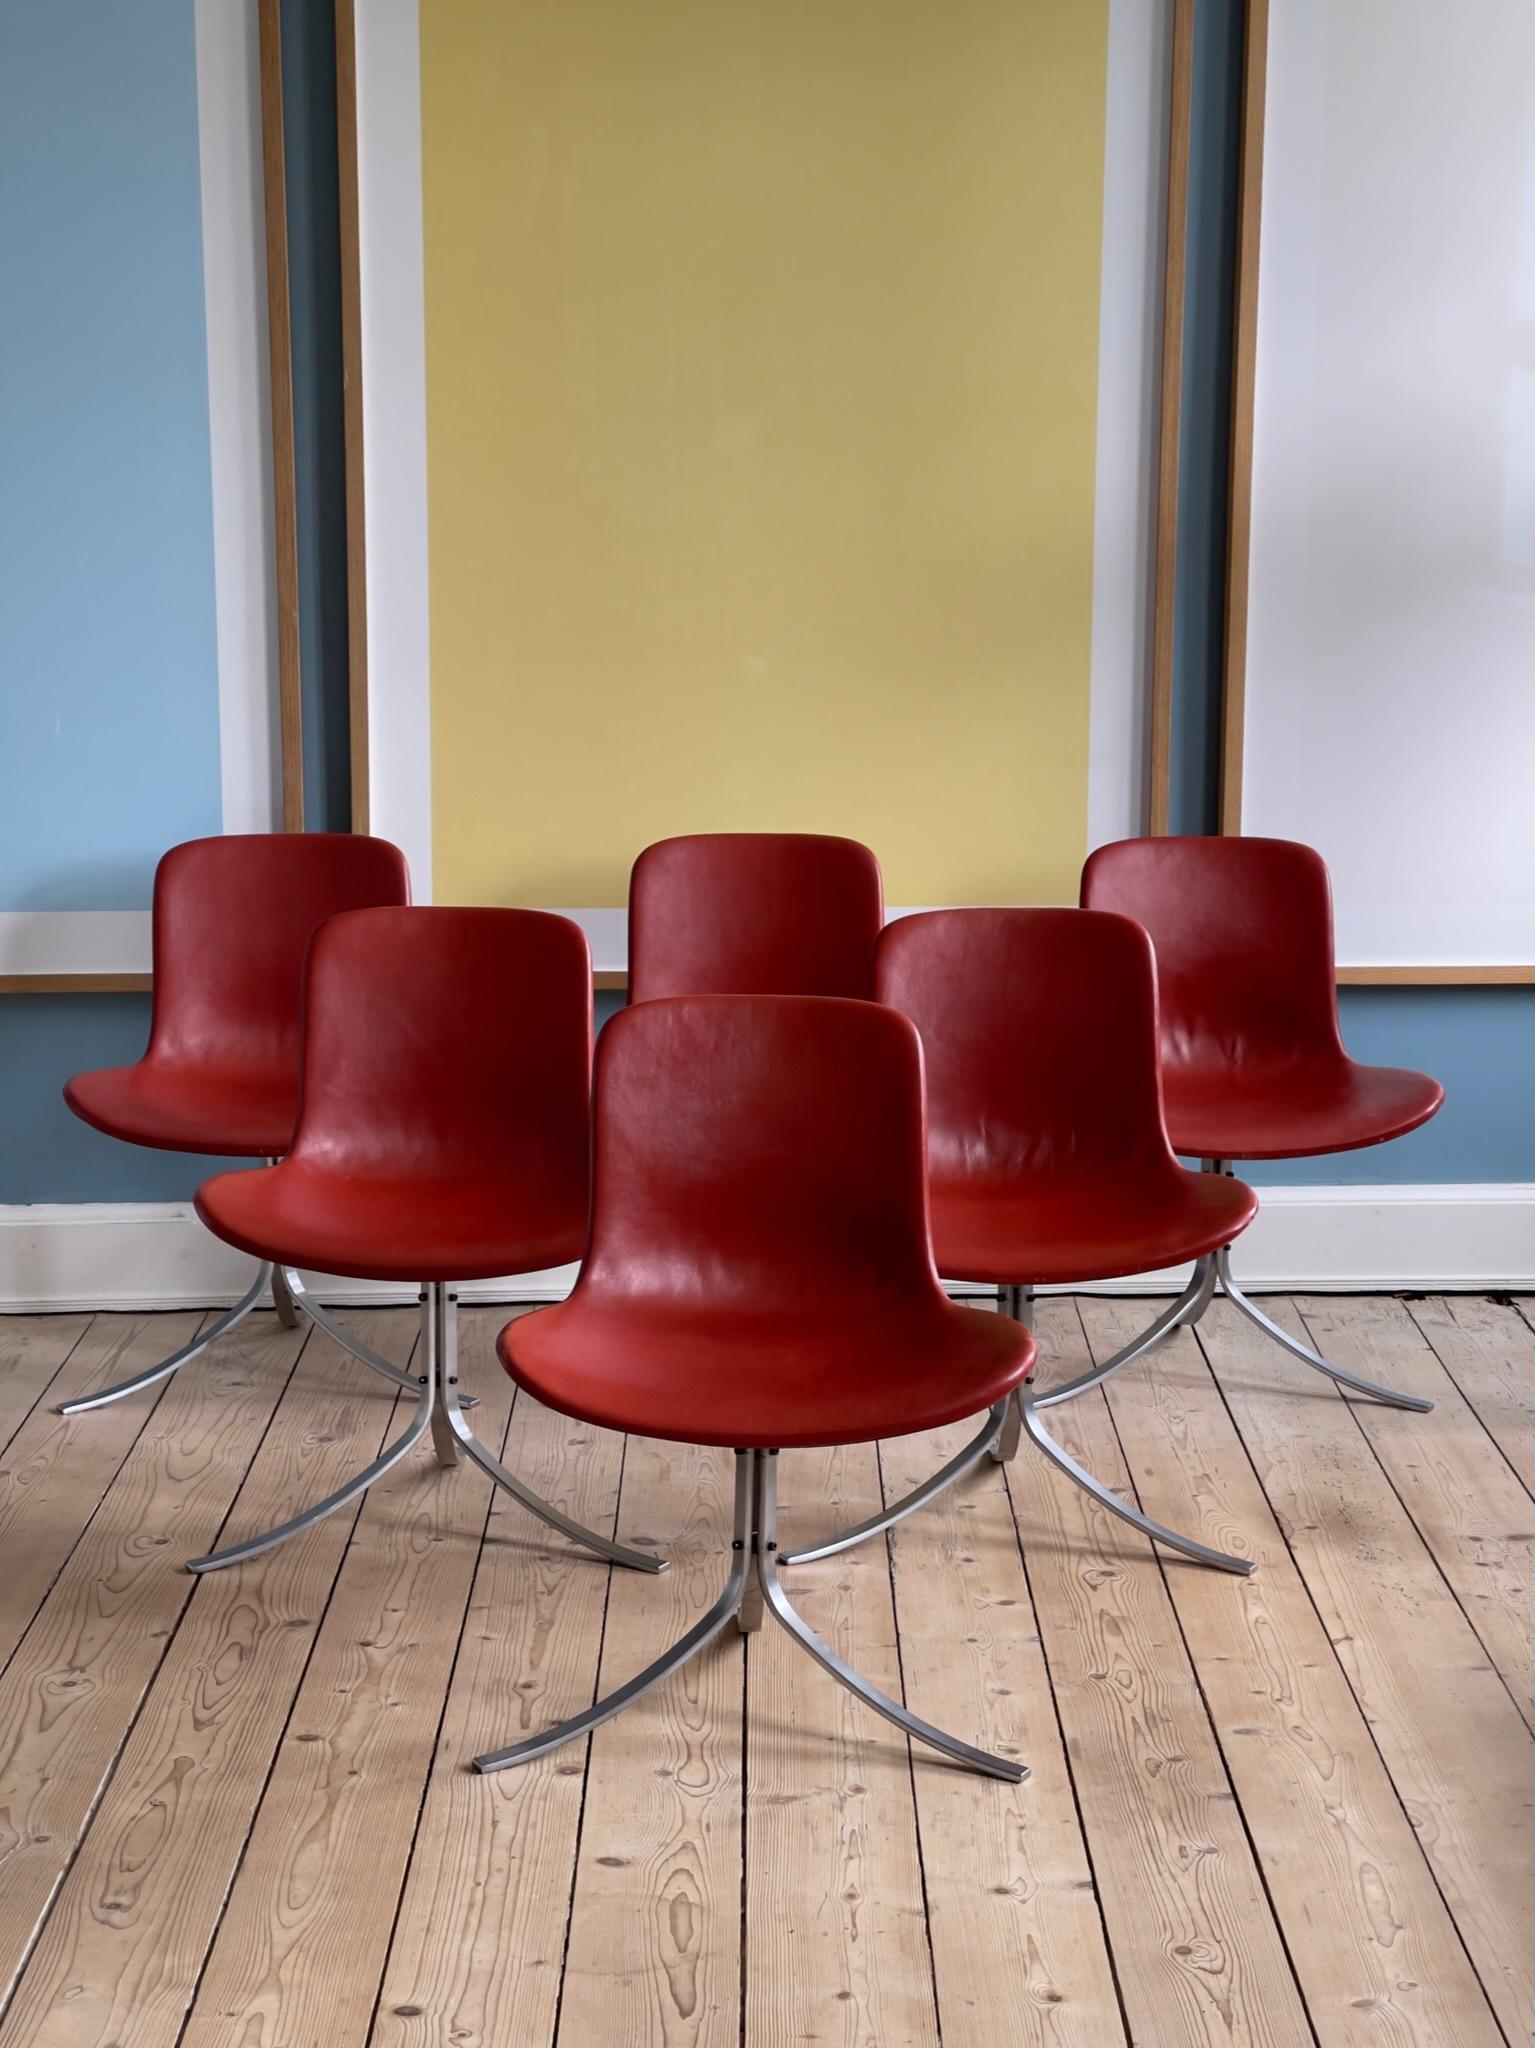 Set of 6 Patinated PK9 Dining Chairs by Poul Kjærholm for Fritz Hansen 1980s. 1